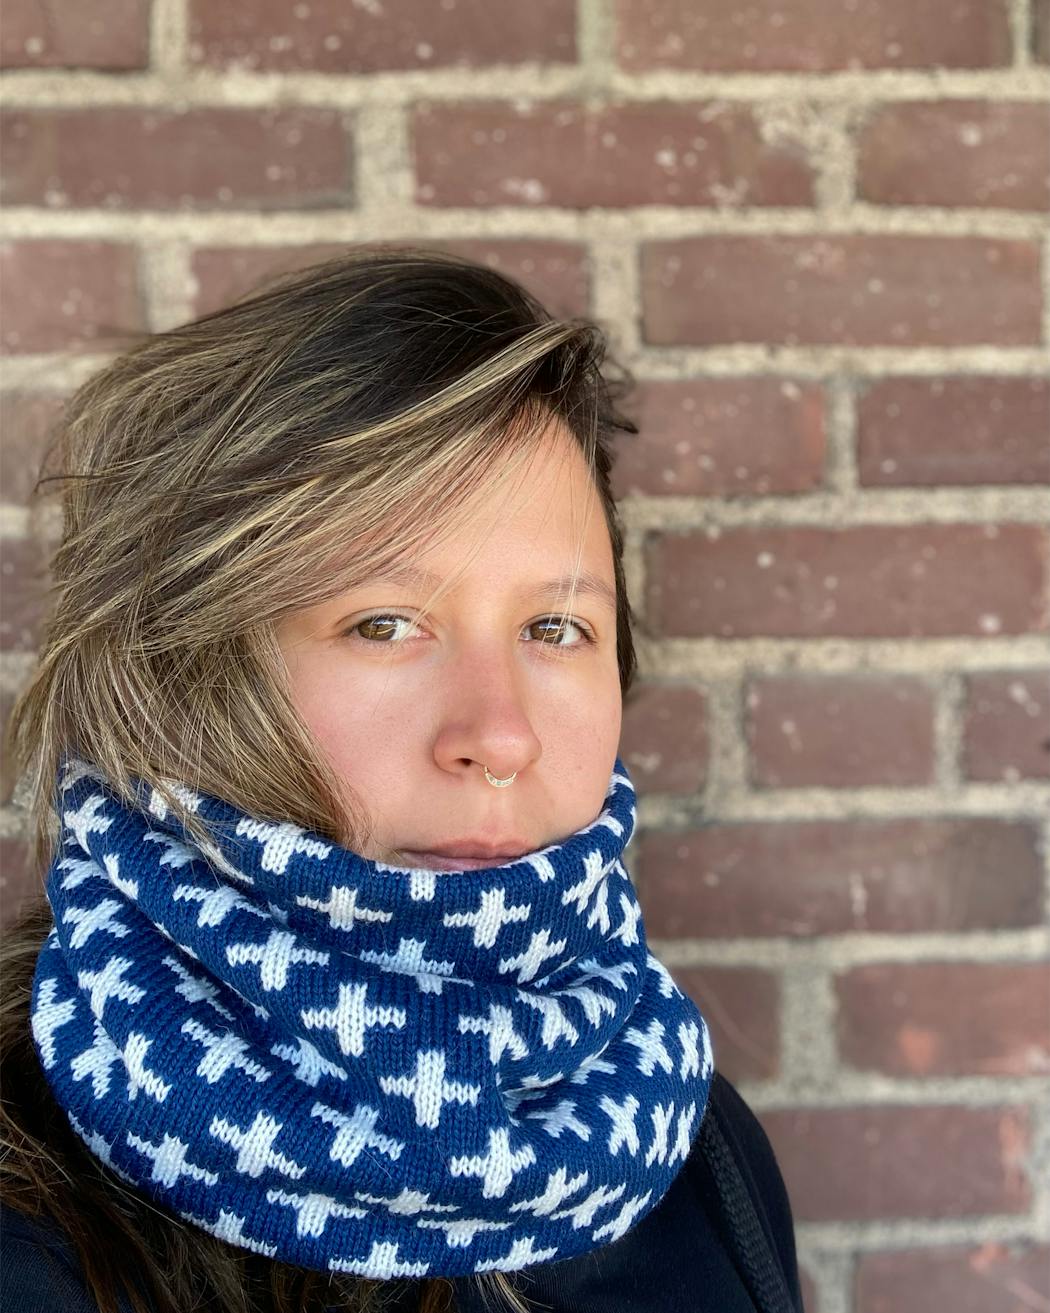 Textile artist and designer Maggie Thompson, who launched Makwa Studio, knits cowls and winter hats that incorporate subtle influences from regalia and beadwork.